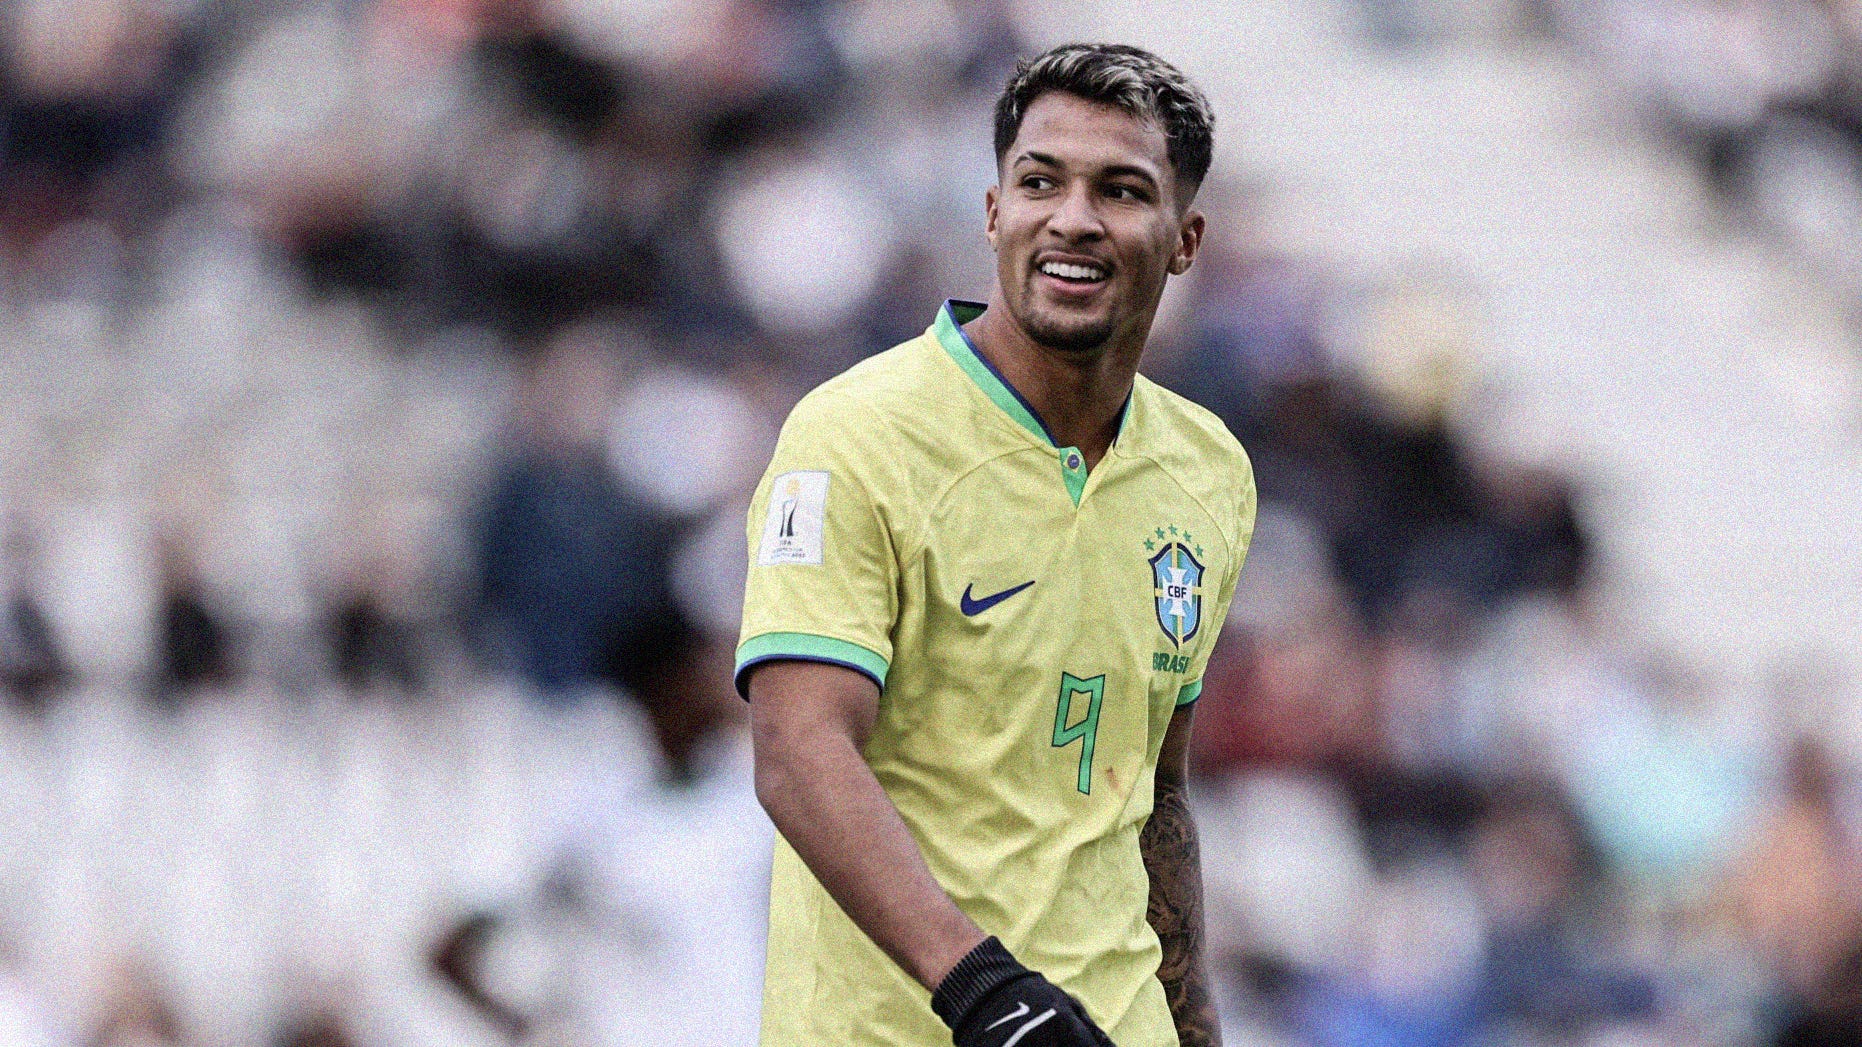 A photo of Brazil's Marcos Leonardo smiling, wearing gloves, at the 2023 FIFA U-20 World Cup